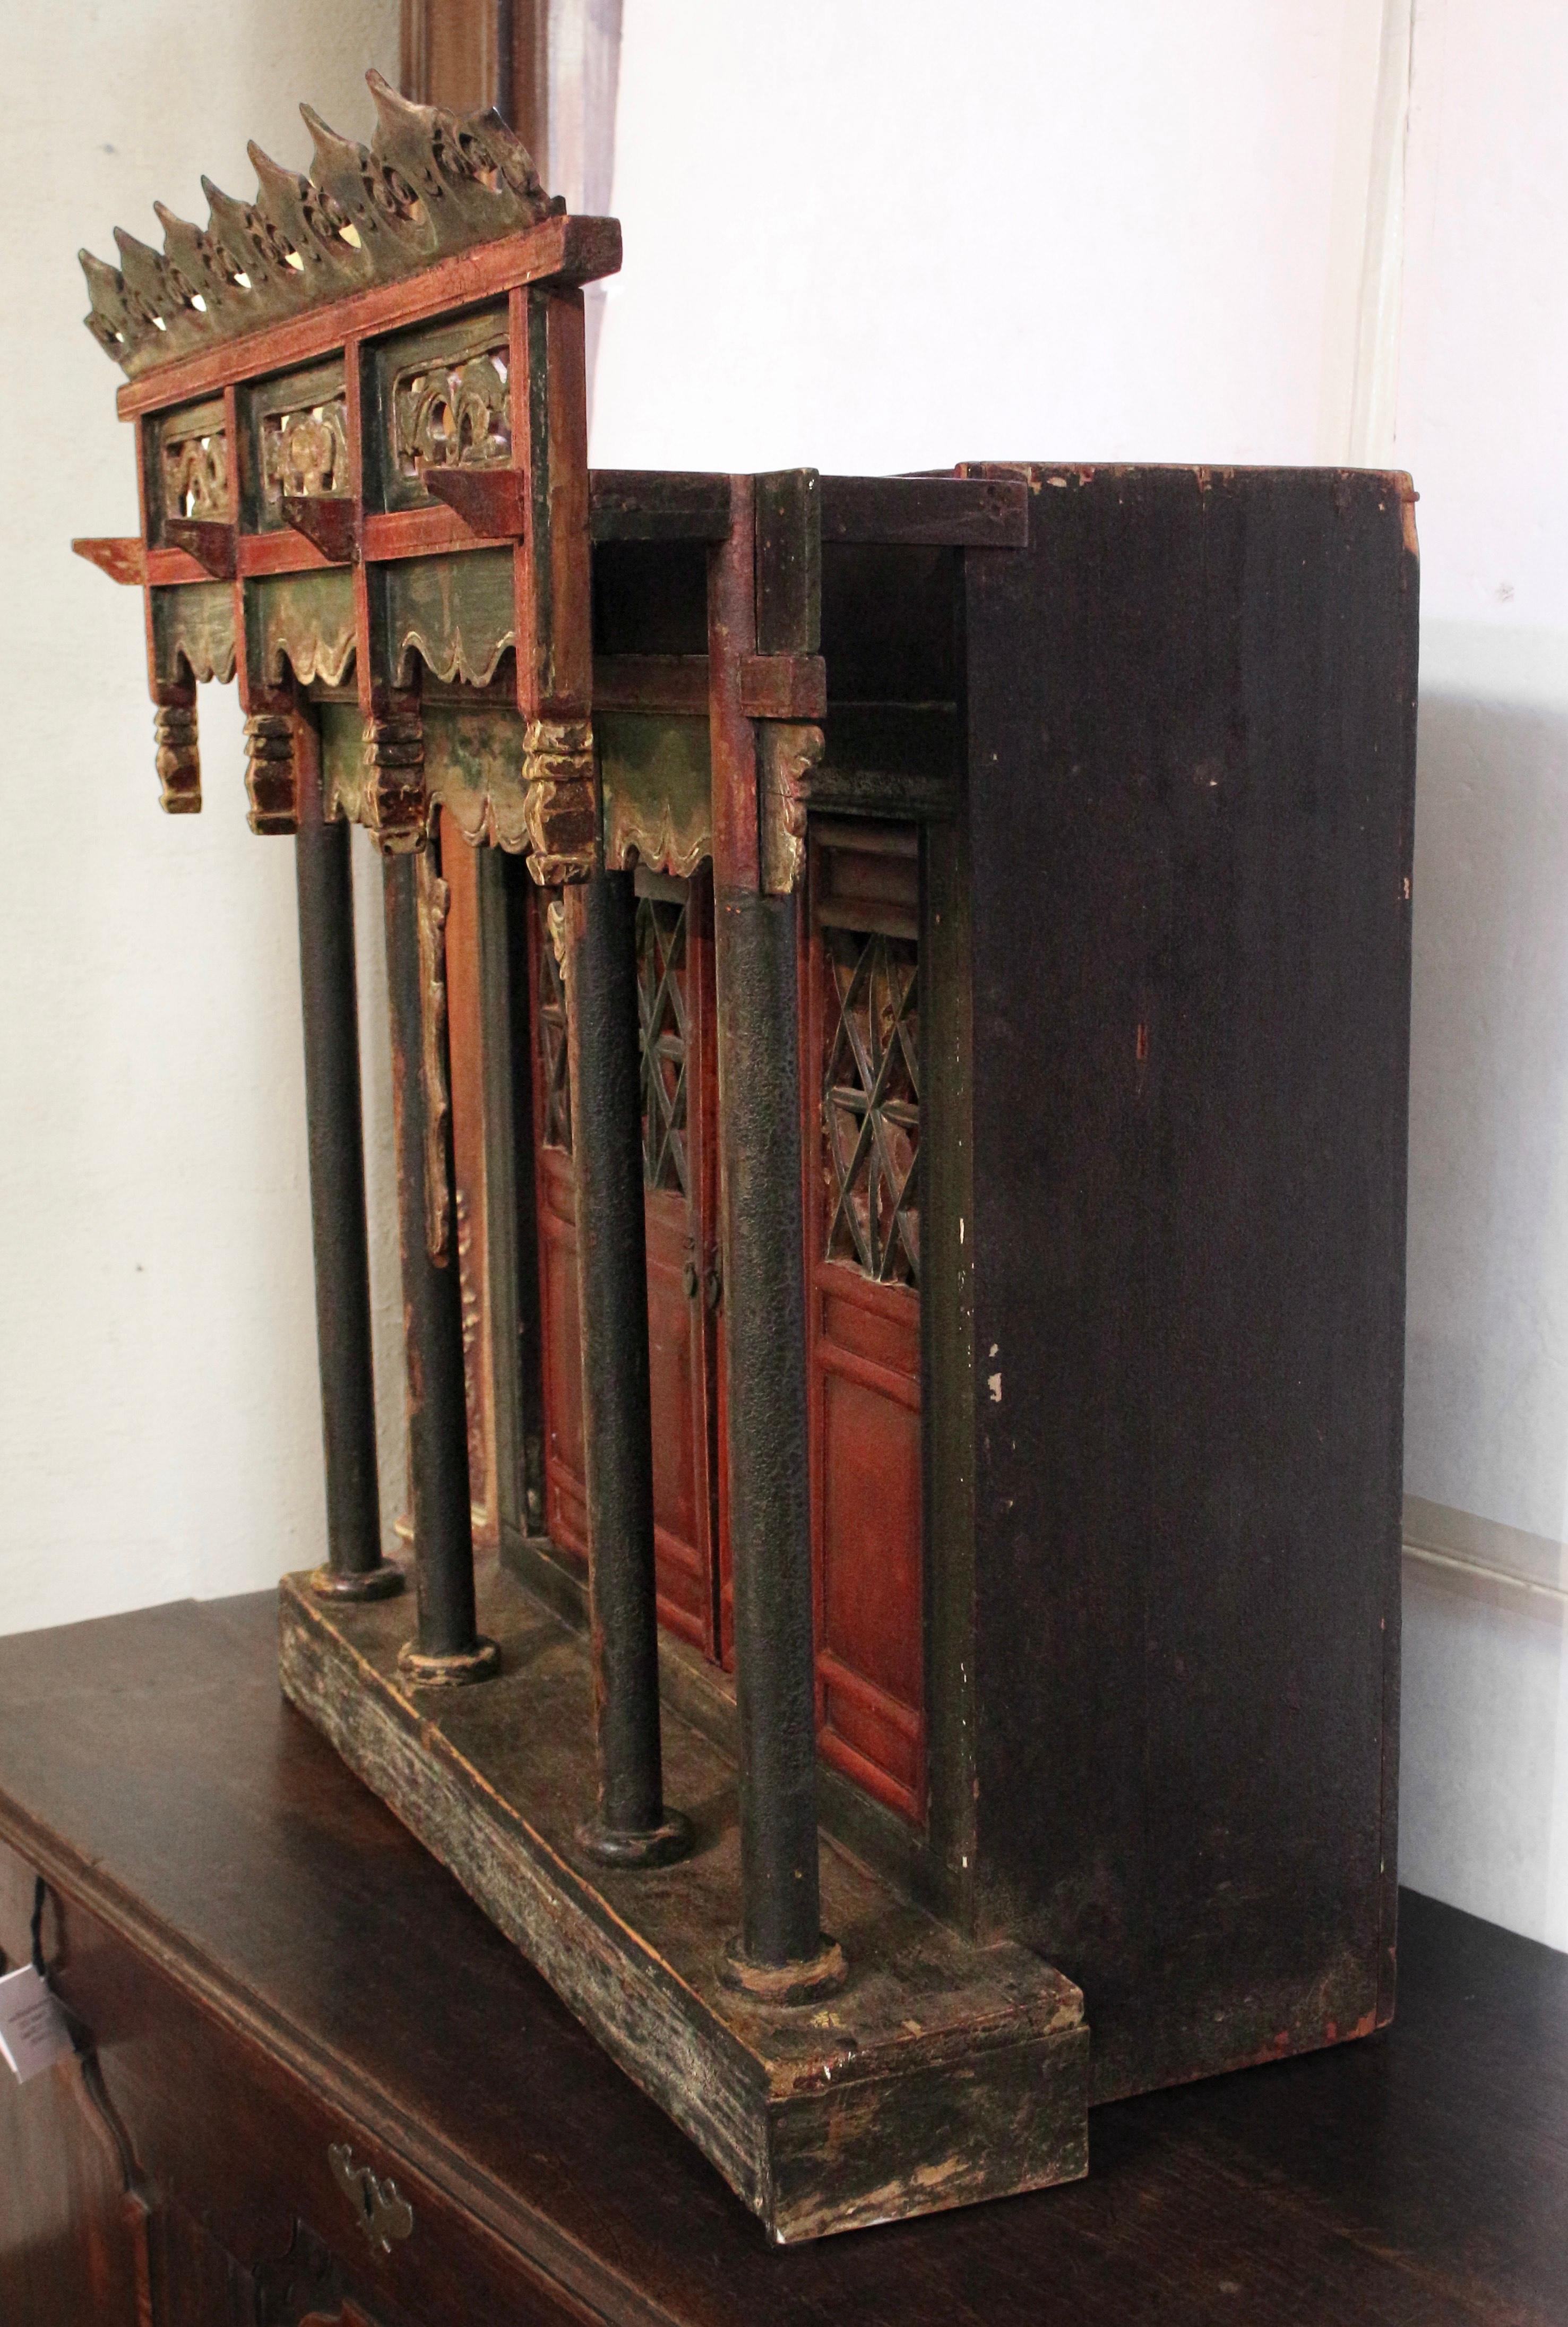 Late 19th century Chinese painted & gilt wood spirit house. Pagoda style Buddhist altar shrine. Flowing naturalistic motifs along the multi-dimensional colonnaded porch facade from the crown to cutwork panels & swag awnings. Latticework doors, the